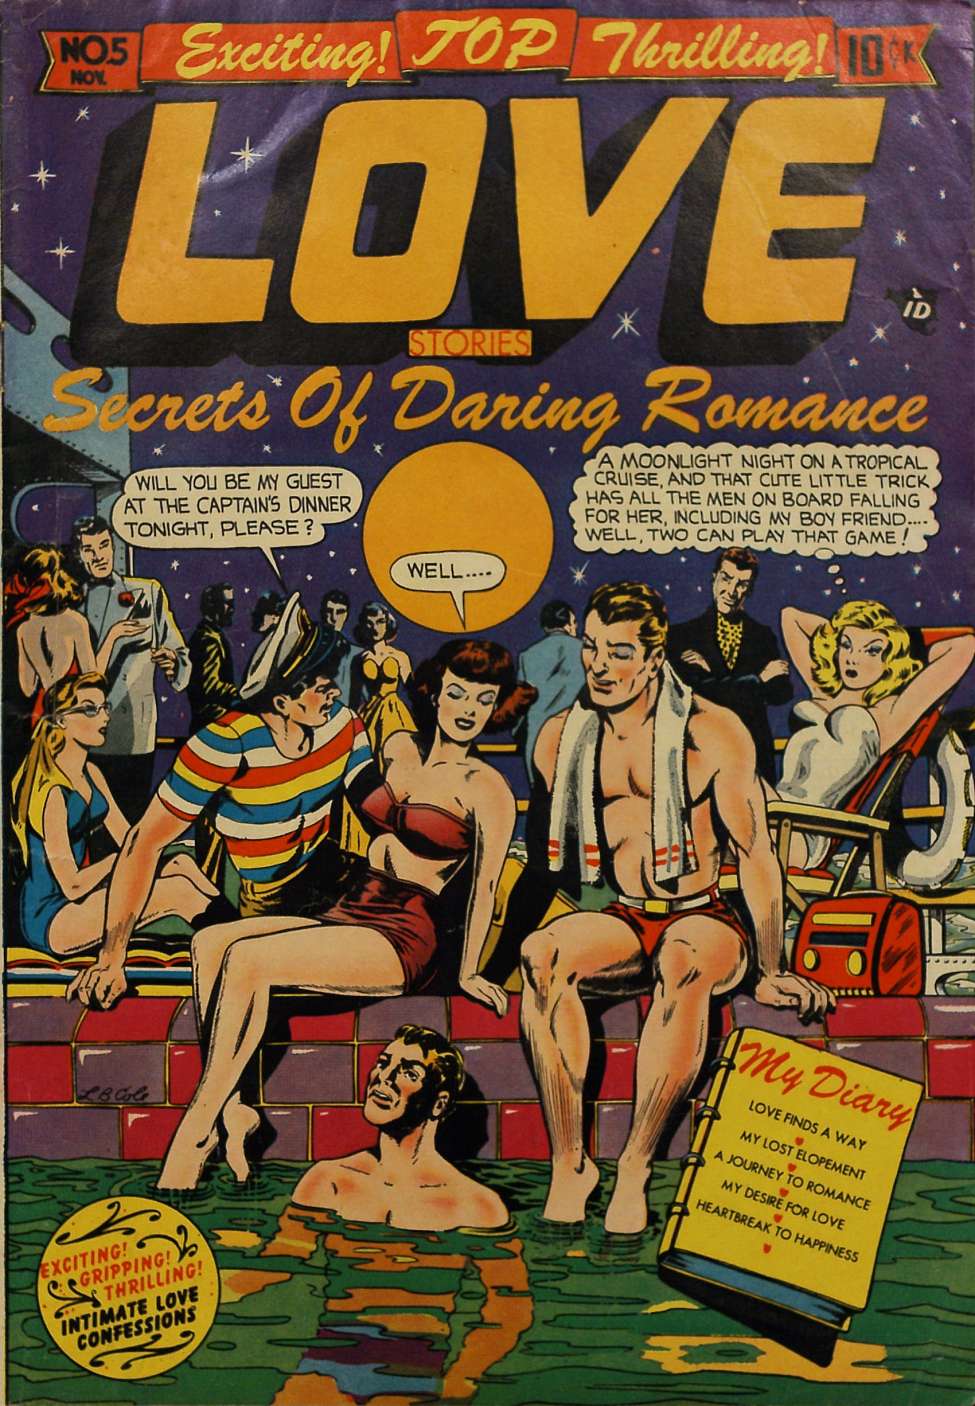 Book Cover For Top Love Stories 5